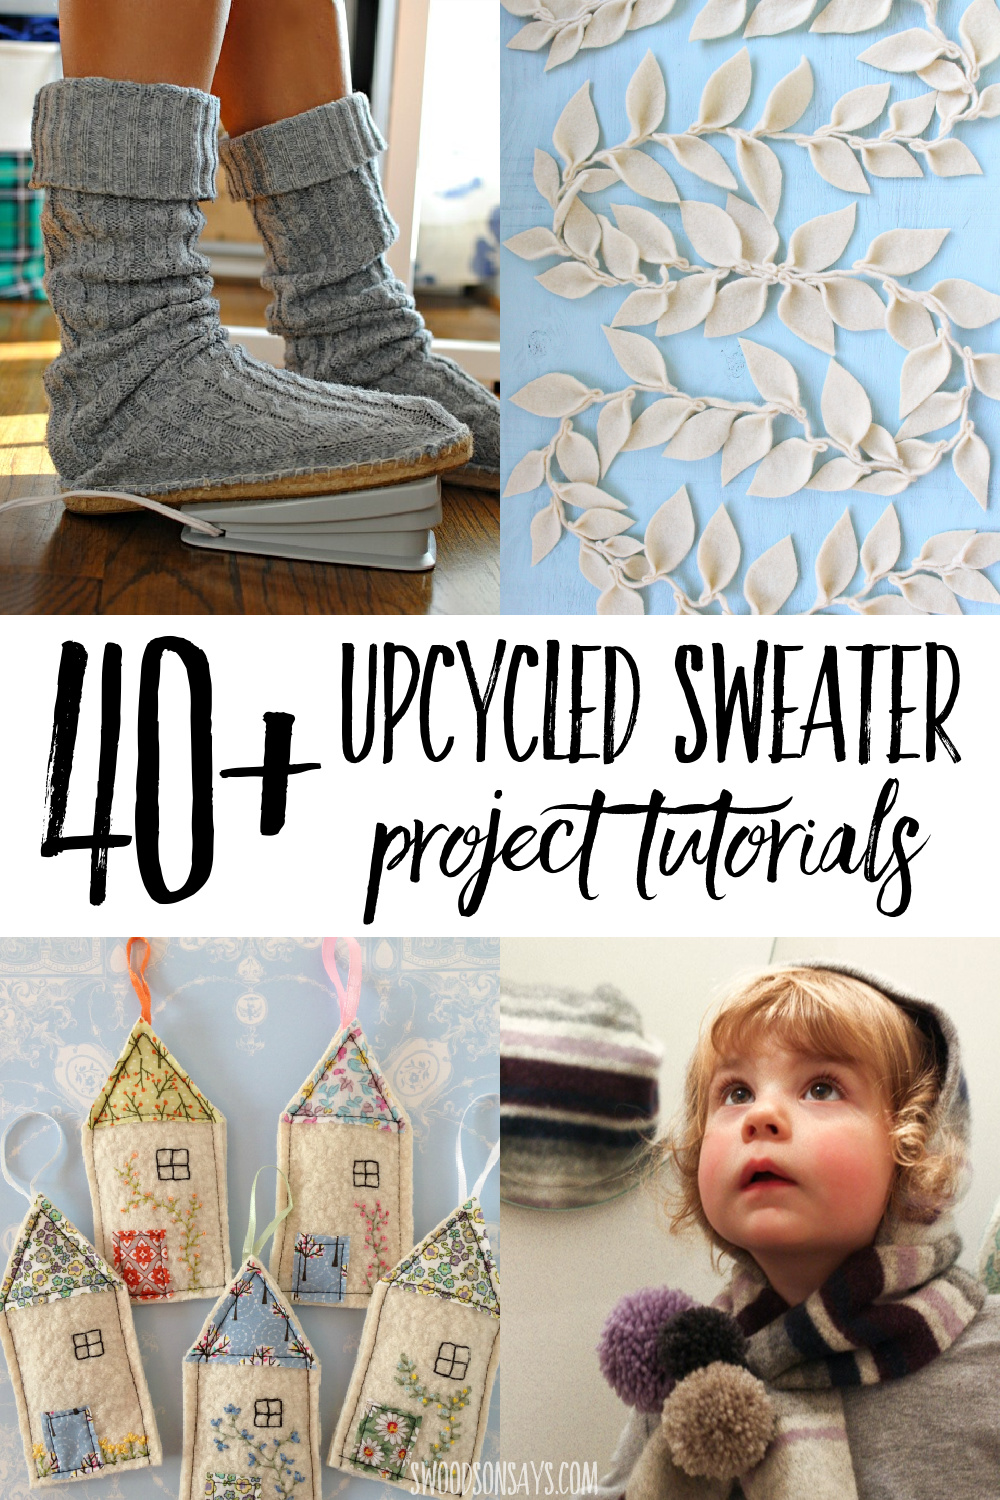 upcycled sweater tutorials